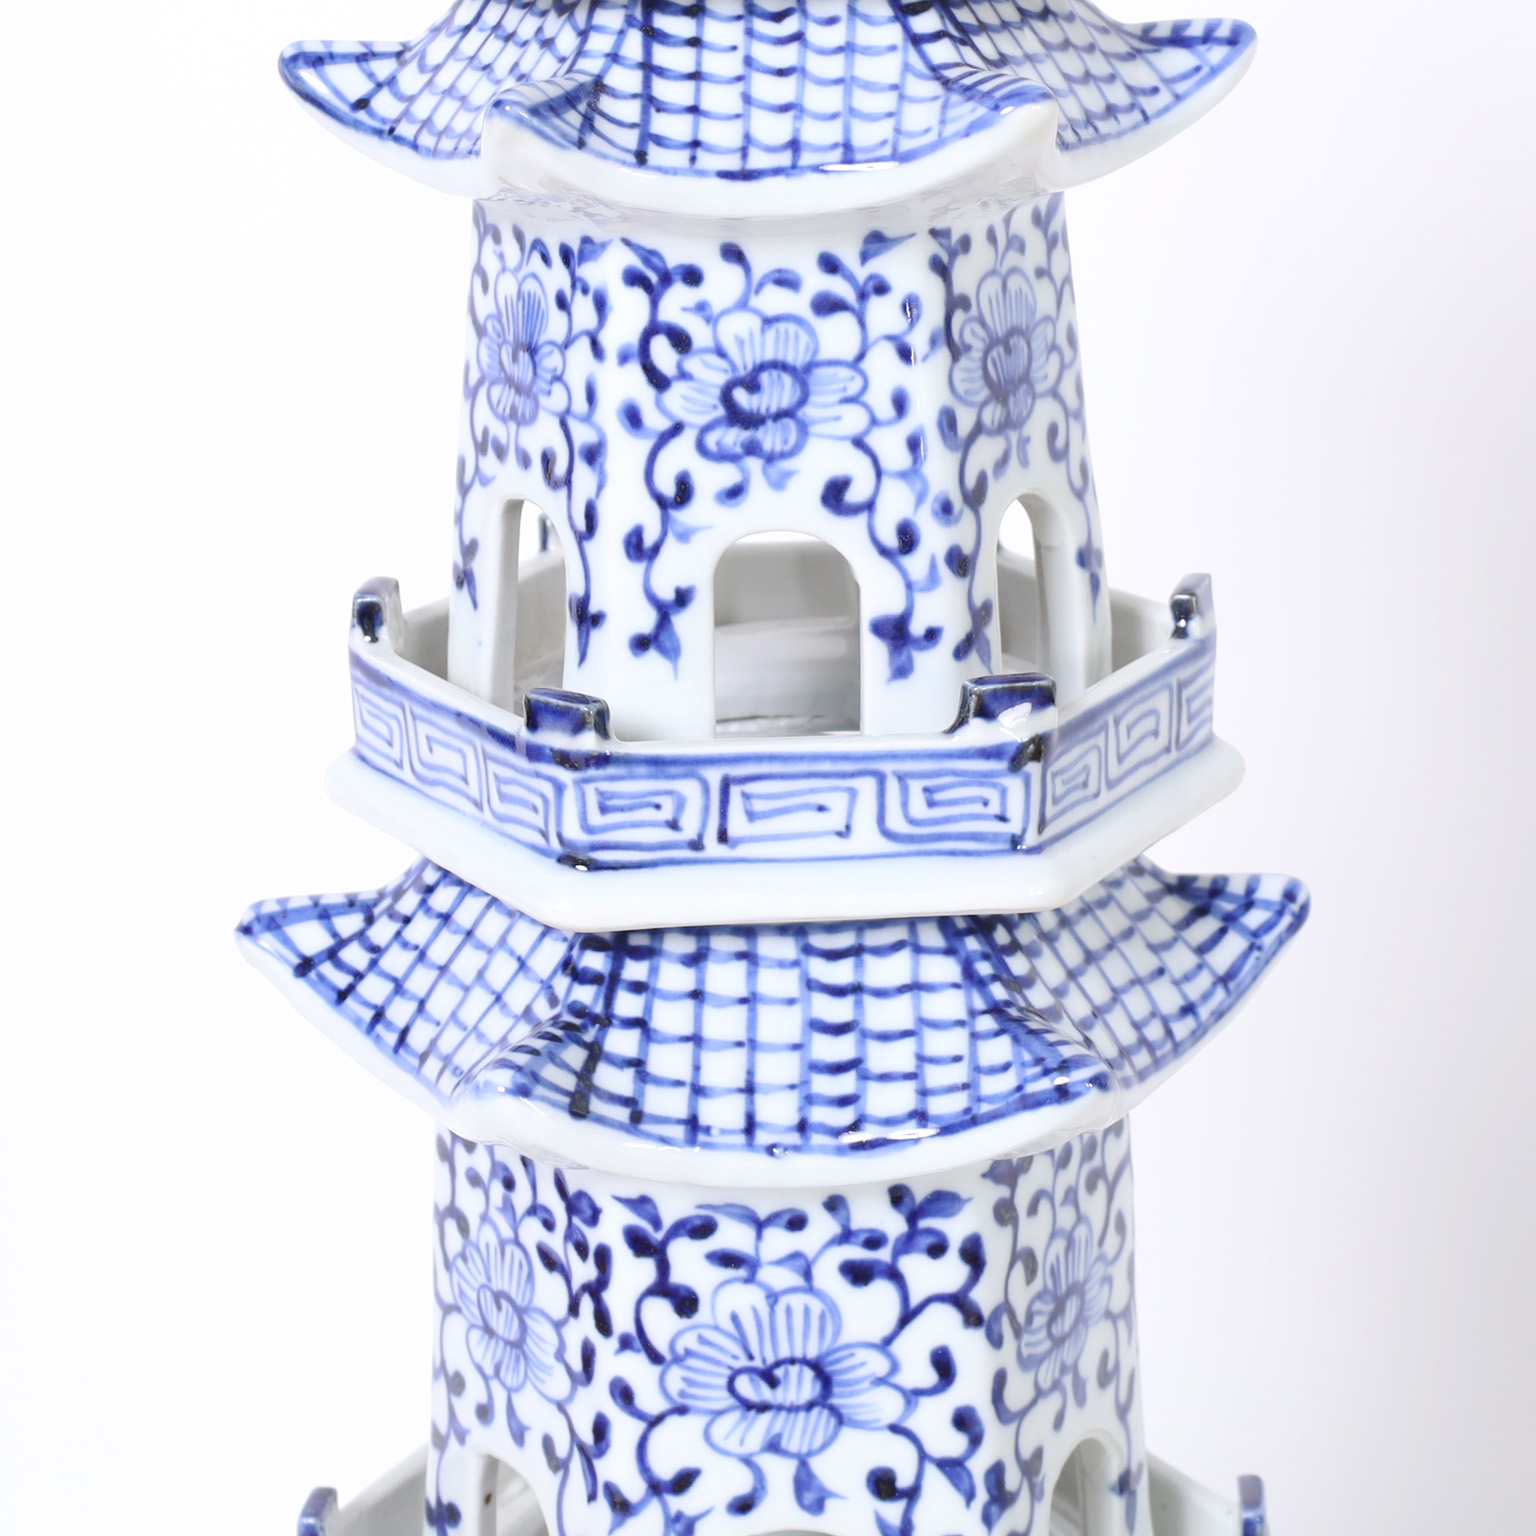 Pair of Chinese Blue and White Porcelain Pagoda Towers